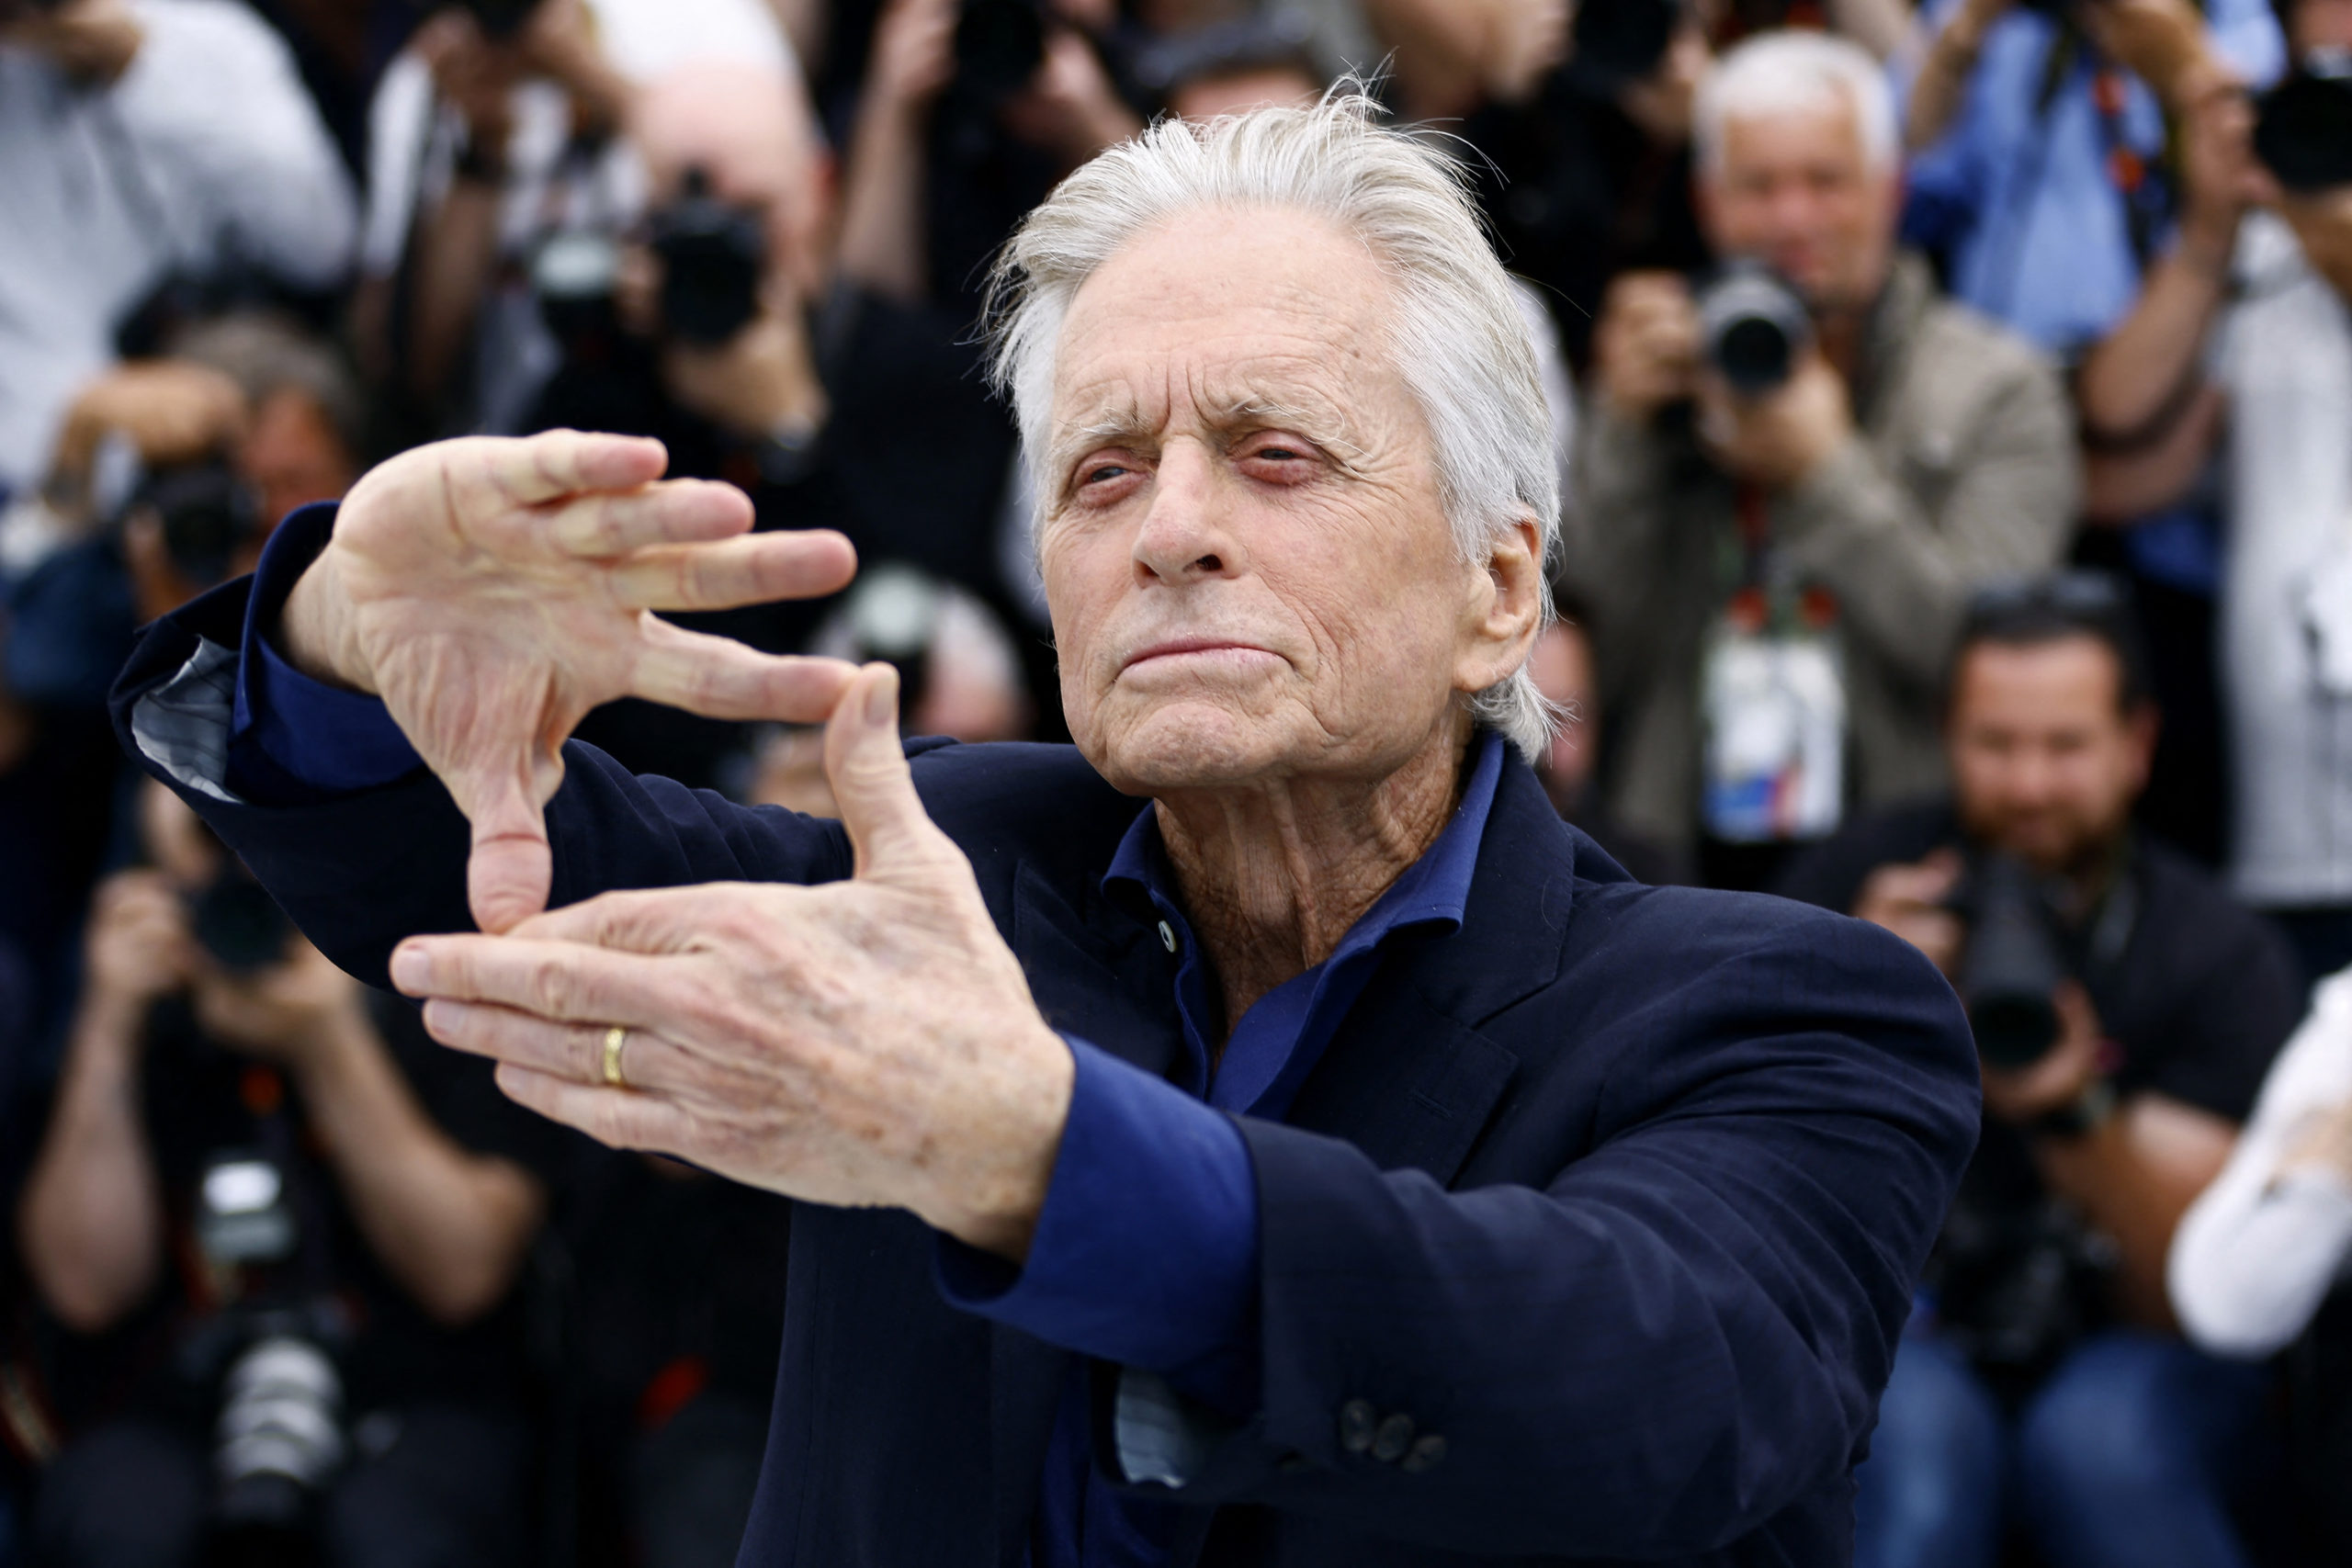 The 76th Cannes Film Festival - Photocall of Michael Douglas - Cannes, France, May 16, 2023. Actor Michael Douglas poses during a photocall before being awarded with an honorary Palme d'Or prize during the opening ceremony. REUTERS/Eric Gaillard